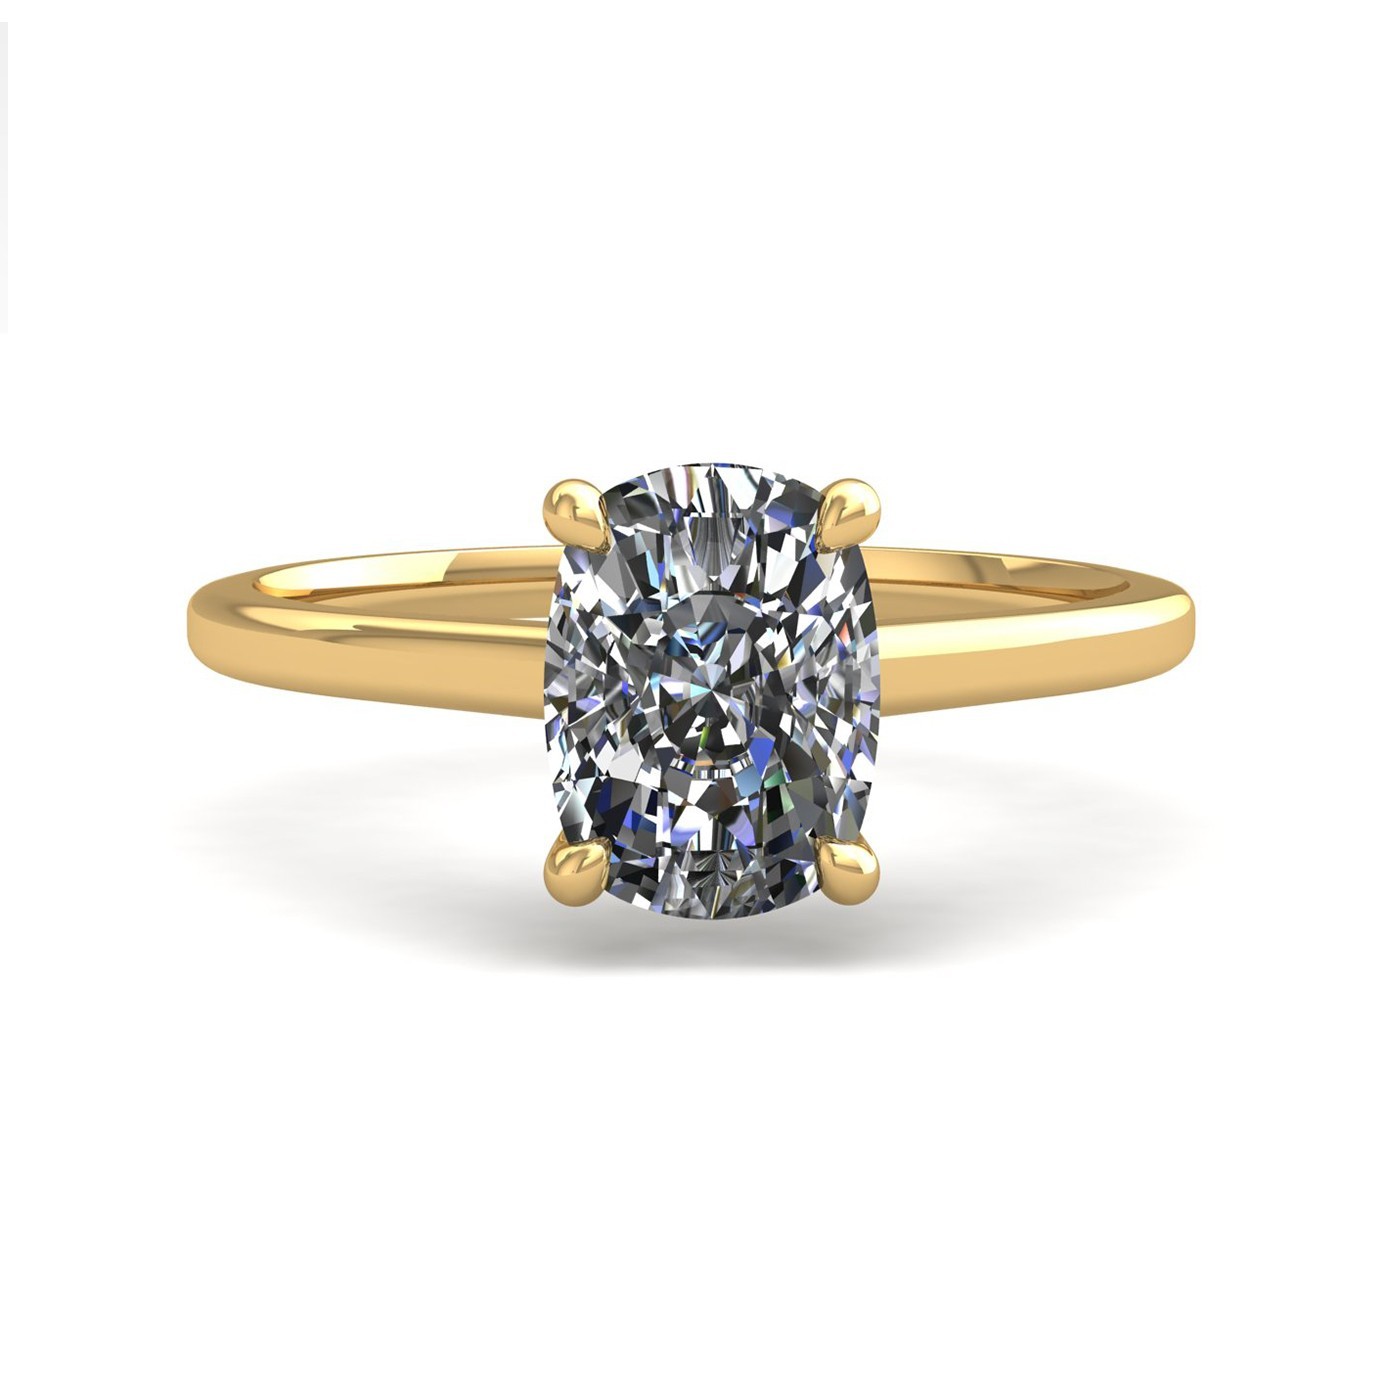 18k yellow gold  0,50 ct 4 prongs solitaire elongated cushion cut diamond engagement ring with whisper thin band Photos & images